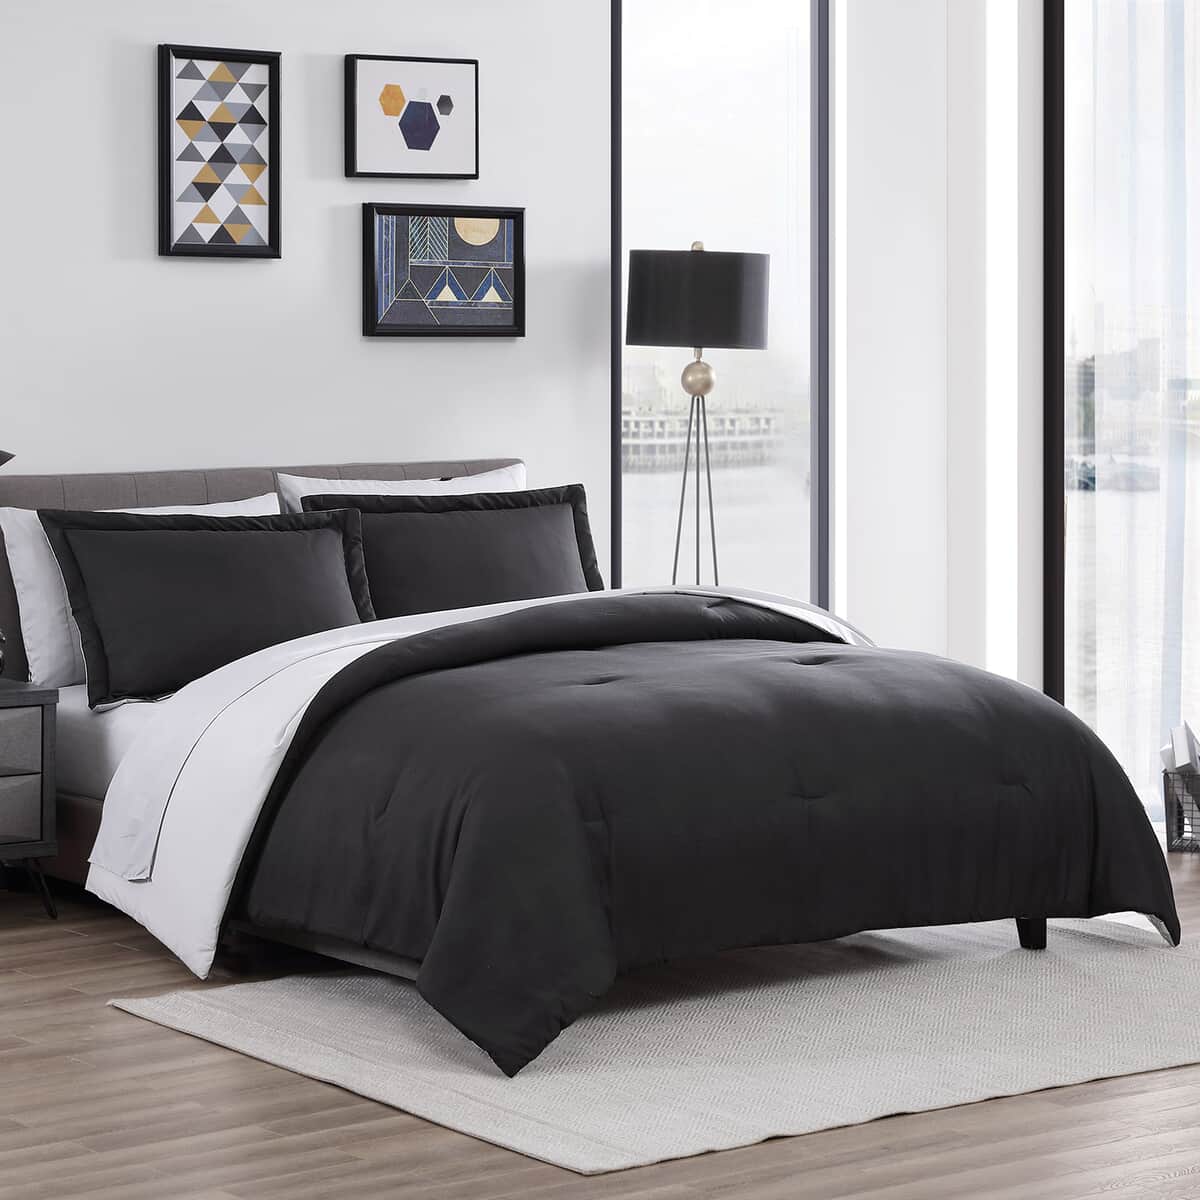 The Nesting Company - Chestnut Reversible 7 Piece Bed in a bag Comforter Set - Black & Gray (Queen) | Bed Comforters | Polyester Comforter | Bedding Sets | Quilt Set image number 1